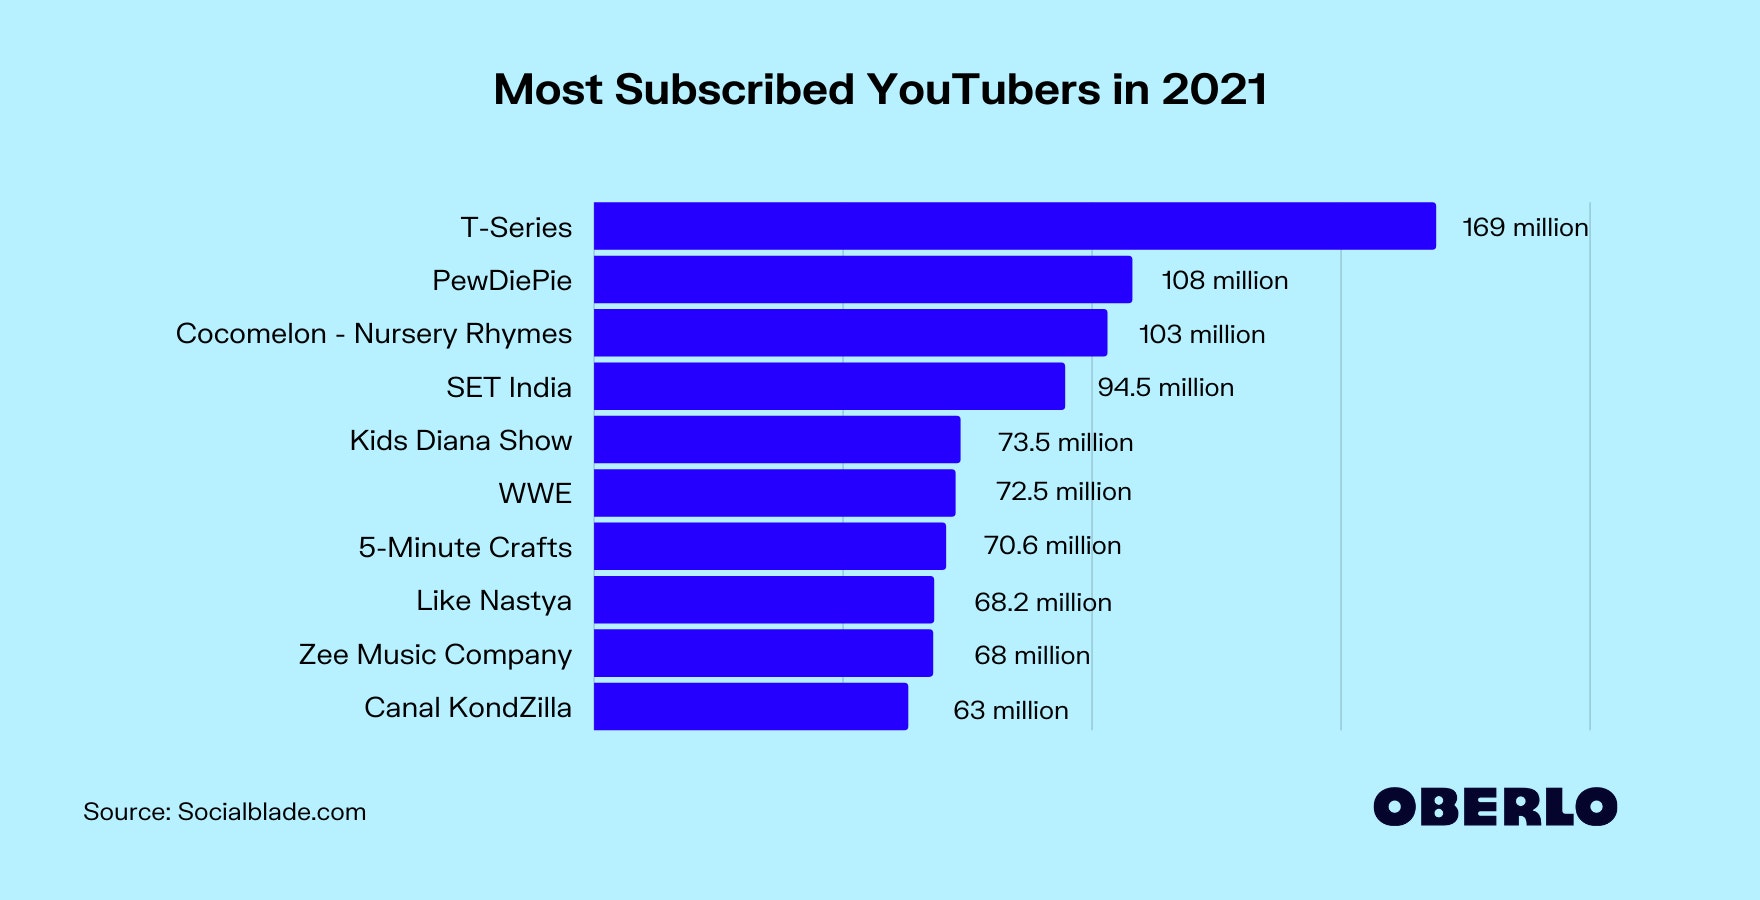 Top 10 YouTubers with Most Subscribers